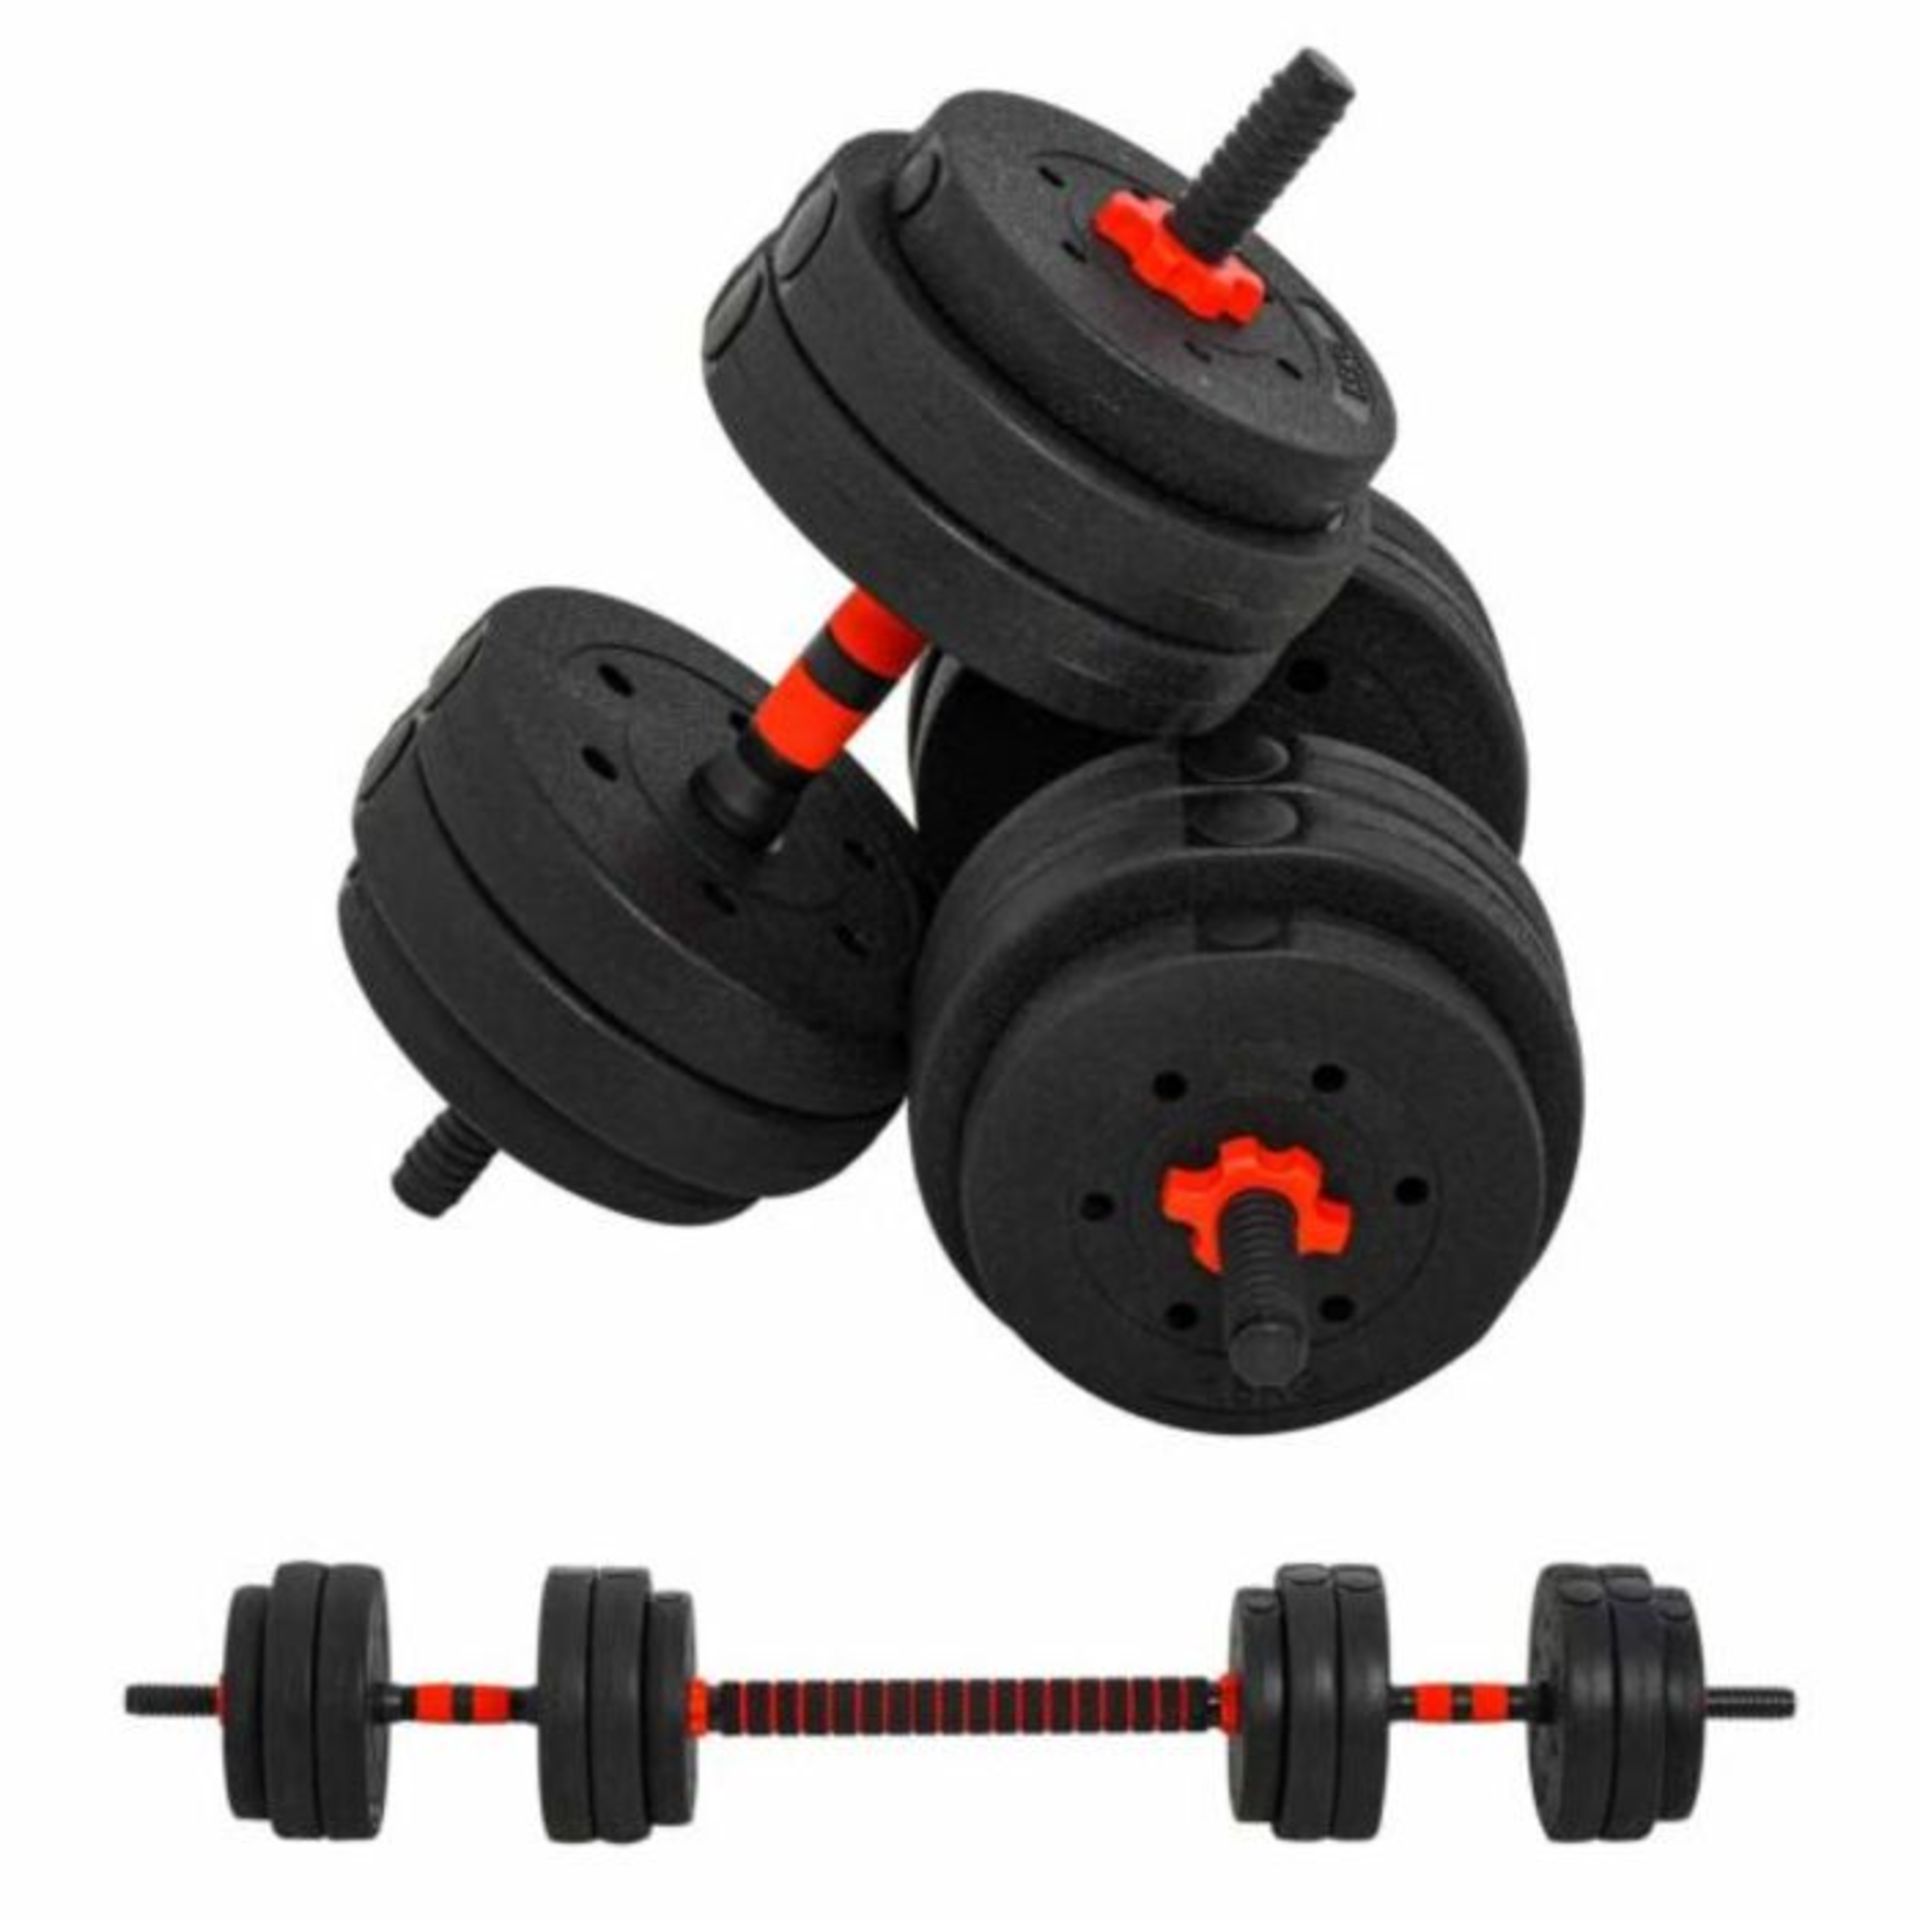 Hom Com 2 in1 Barbell/Dumb bell 20kg weight set, new and boxed, Similar sets retail at around œ40